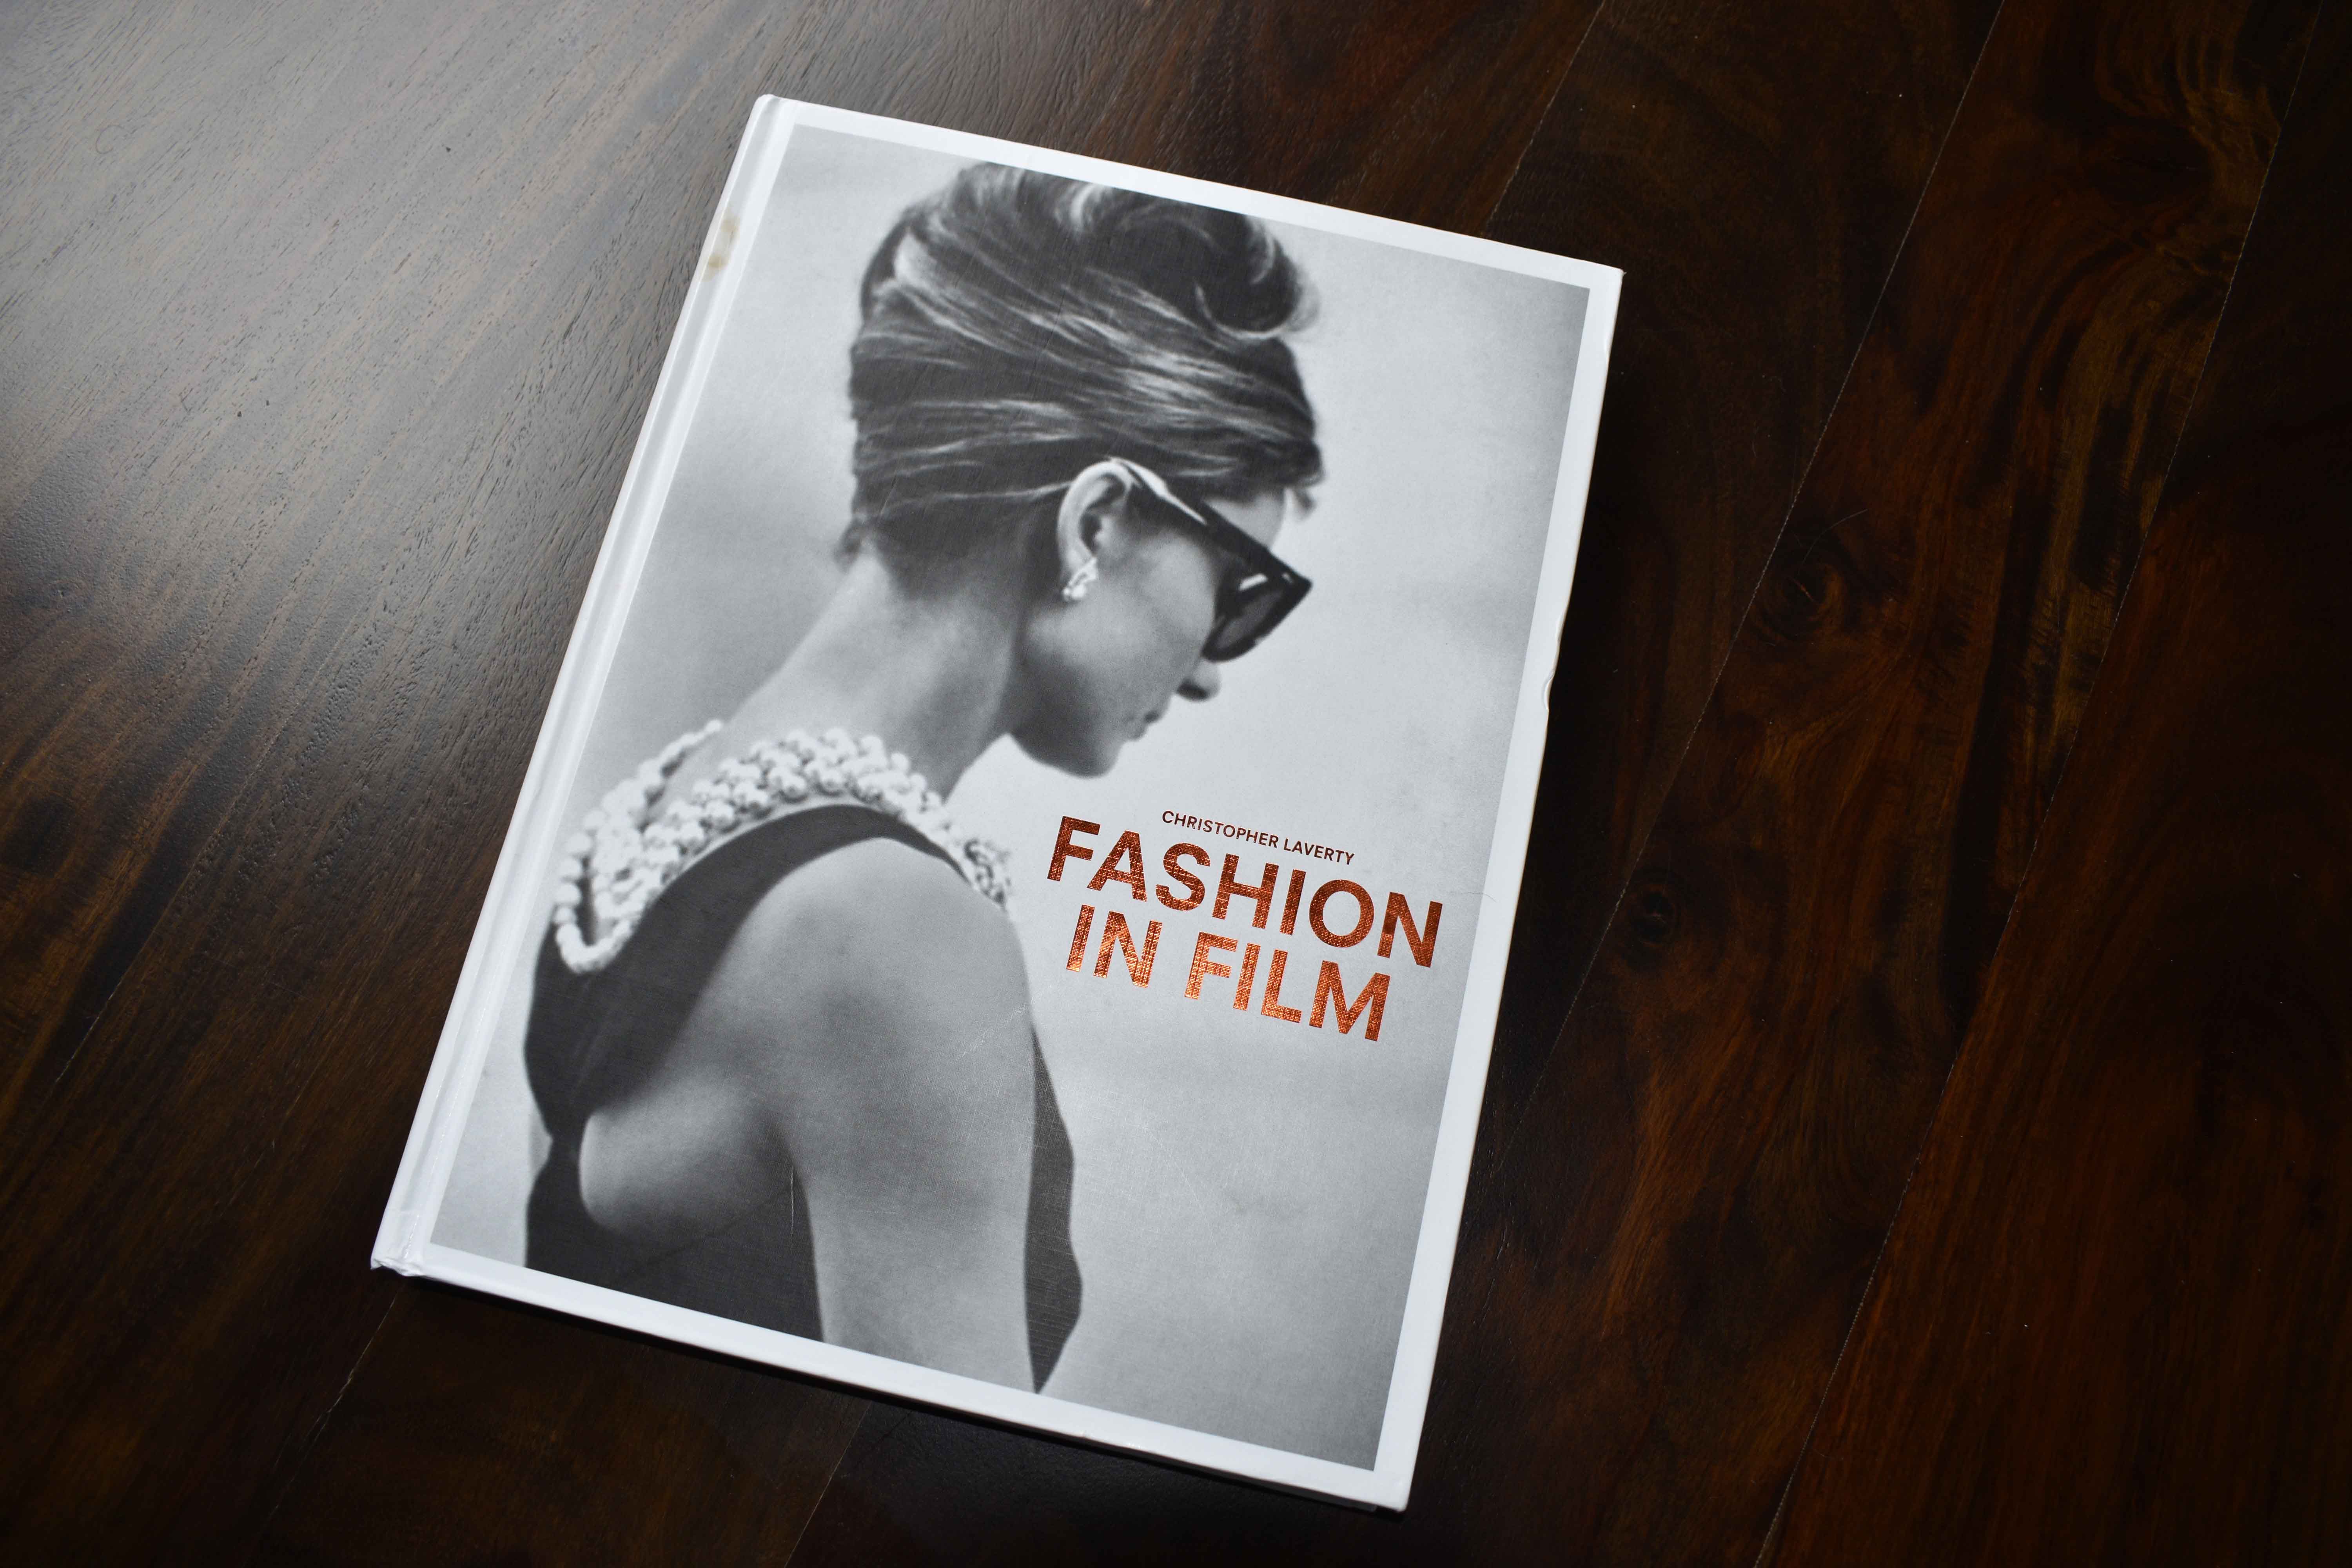 The Fashion Books I bought for Studying Fashion Design